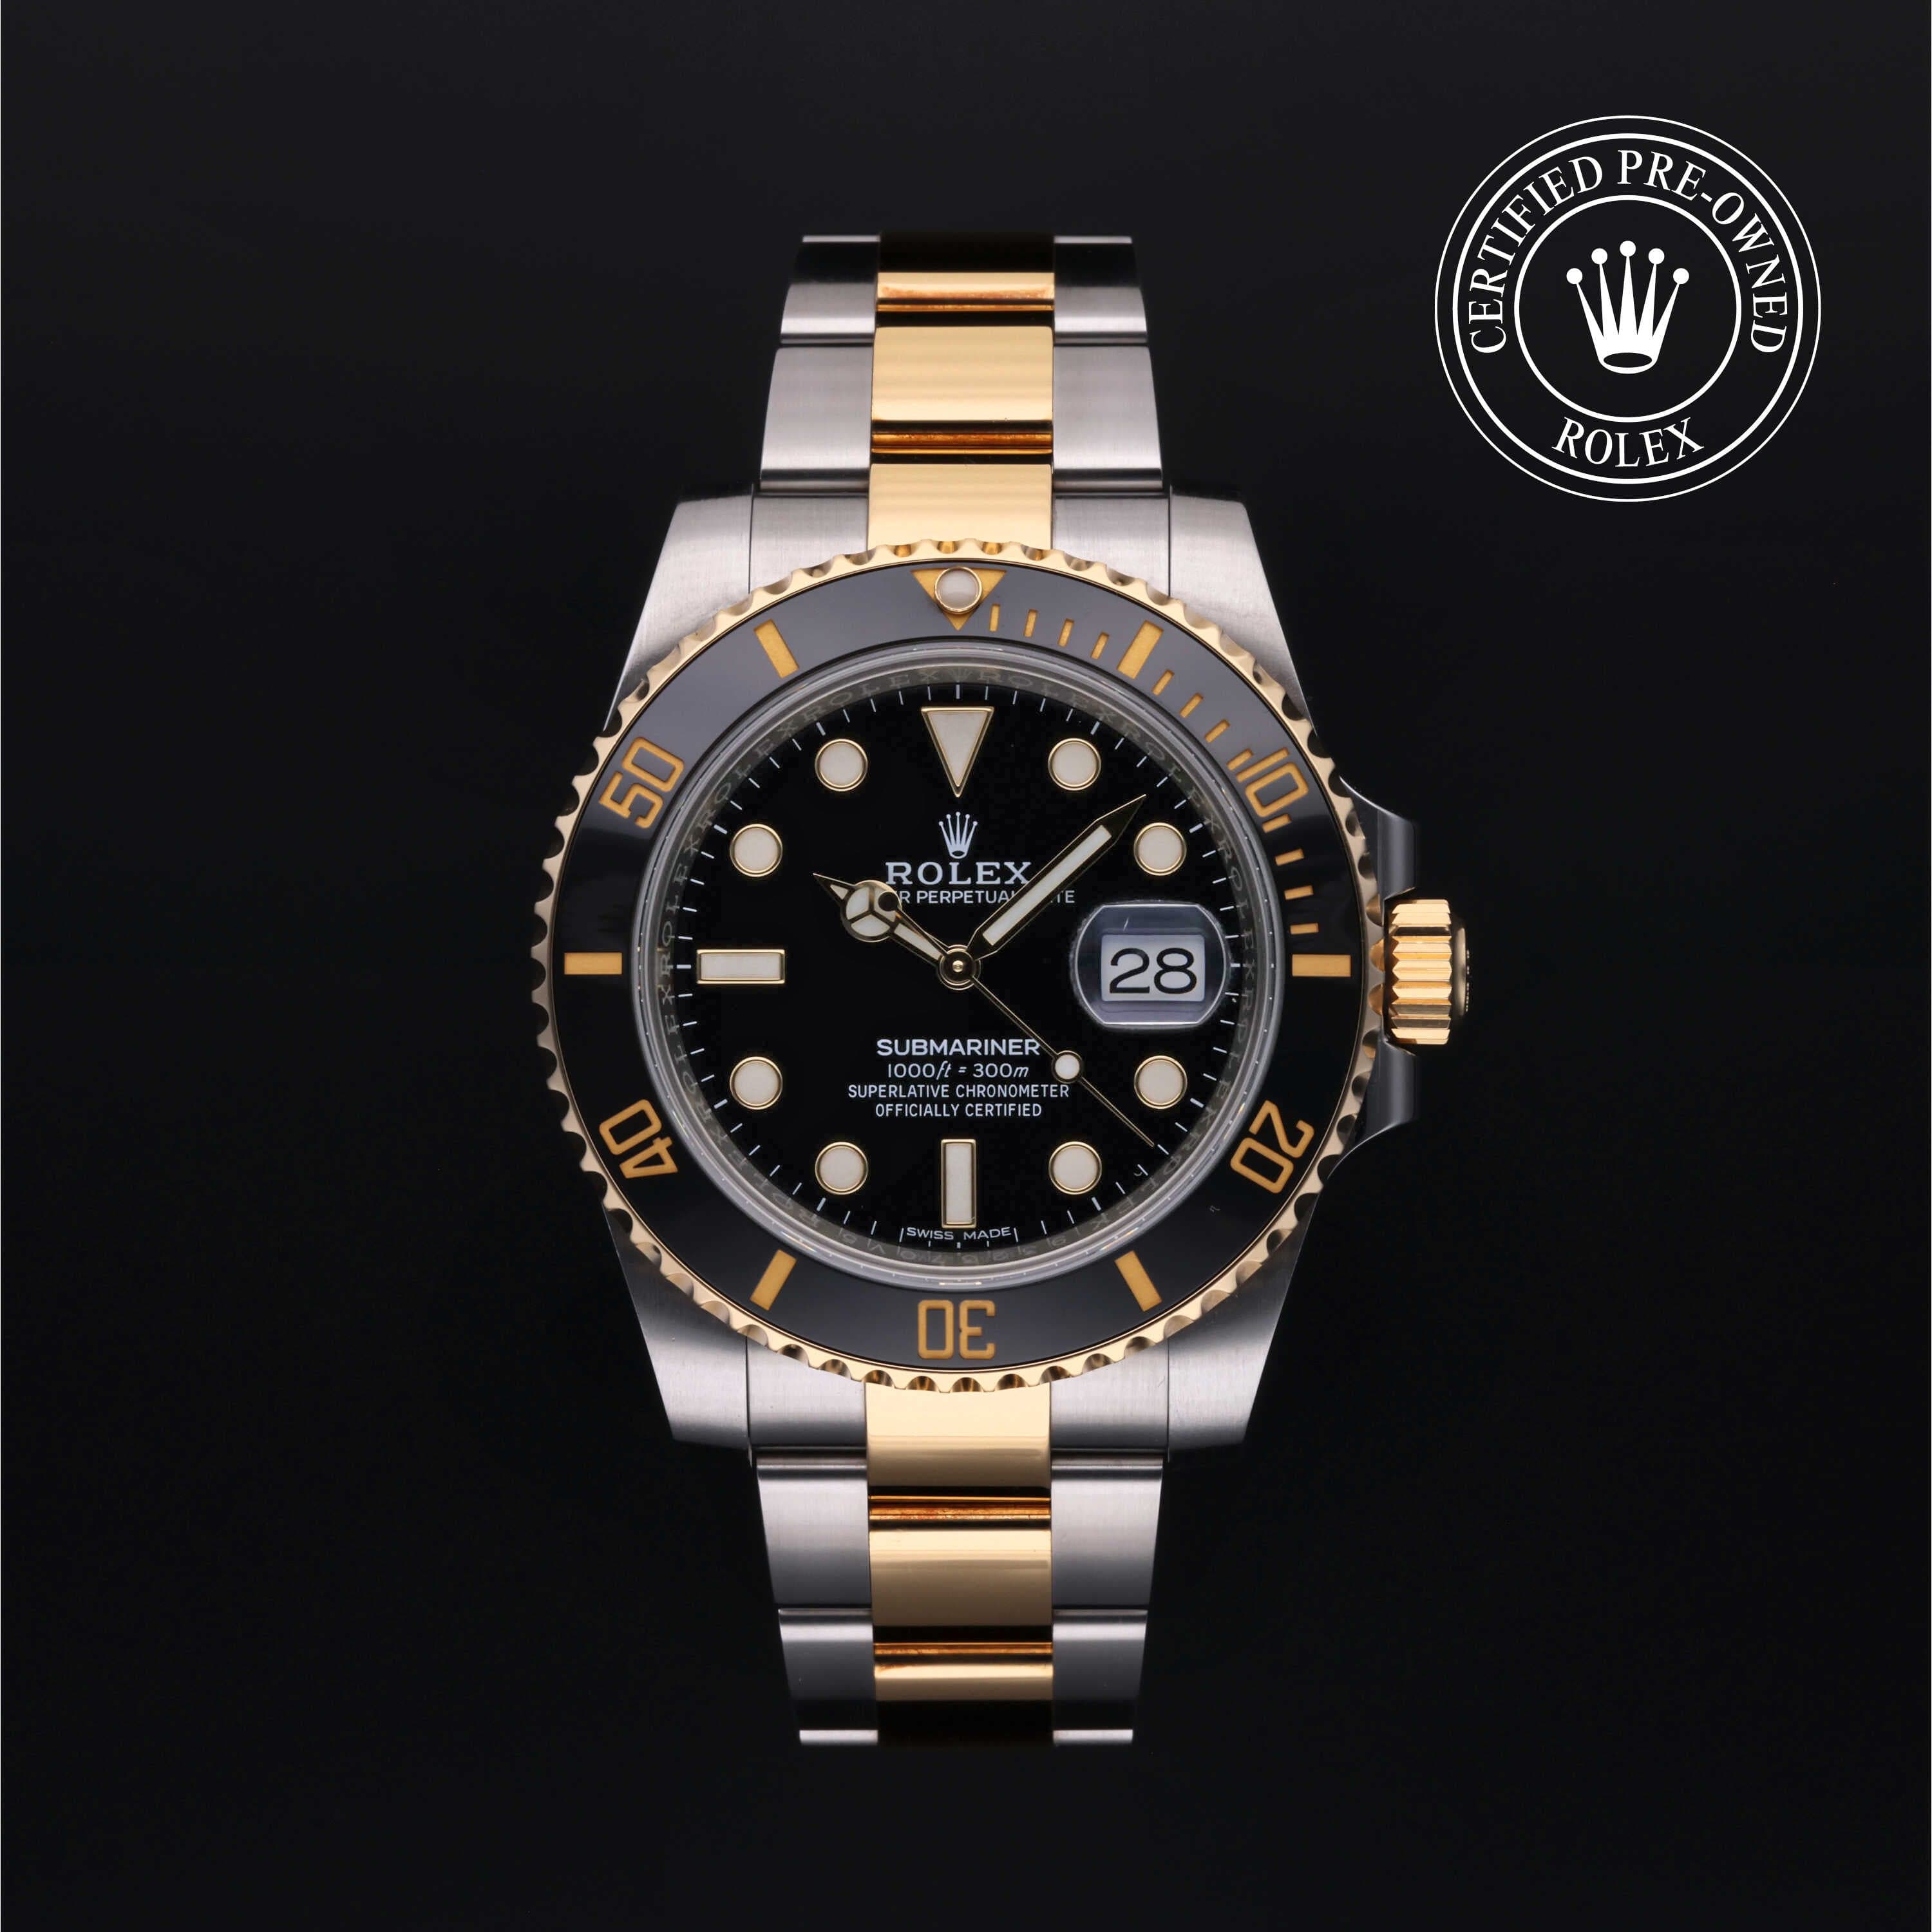 Rolex Certified Pre-Owned Submariner in Oyster, 42 mm, Stainless Steel and yellow gold 116613LN watch available at Long's Jewelers.